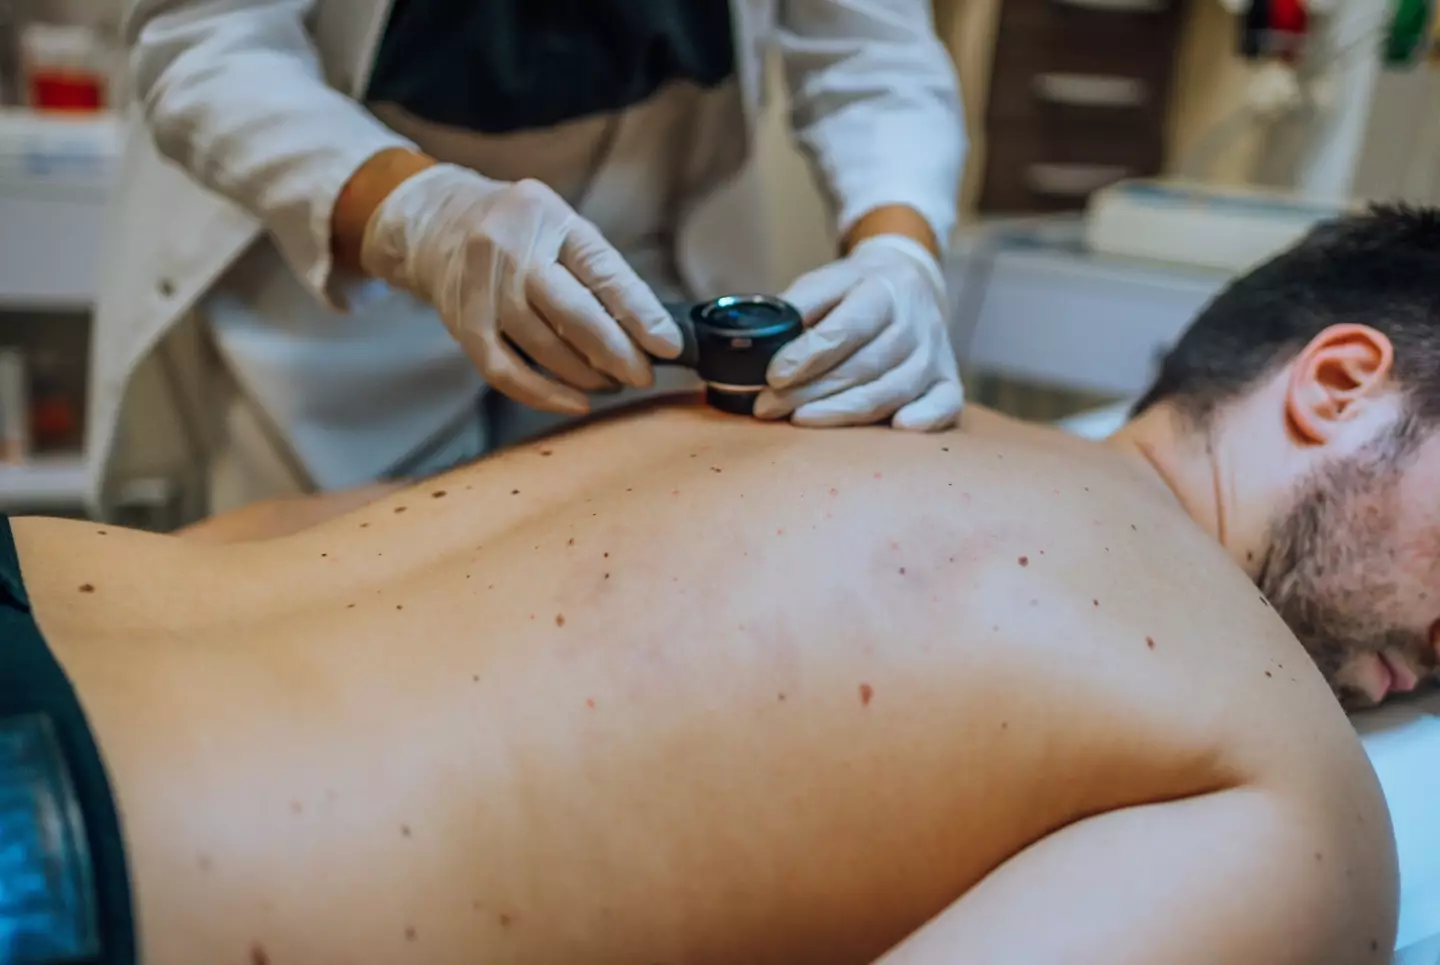 The YouTuber urged fans to get their skin checked by medics on a regular basis.